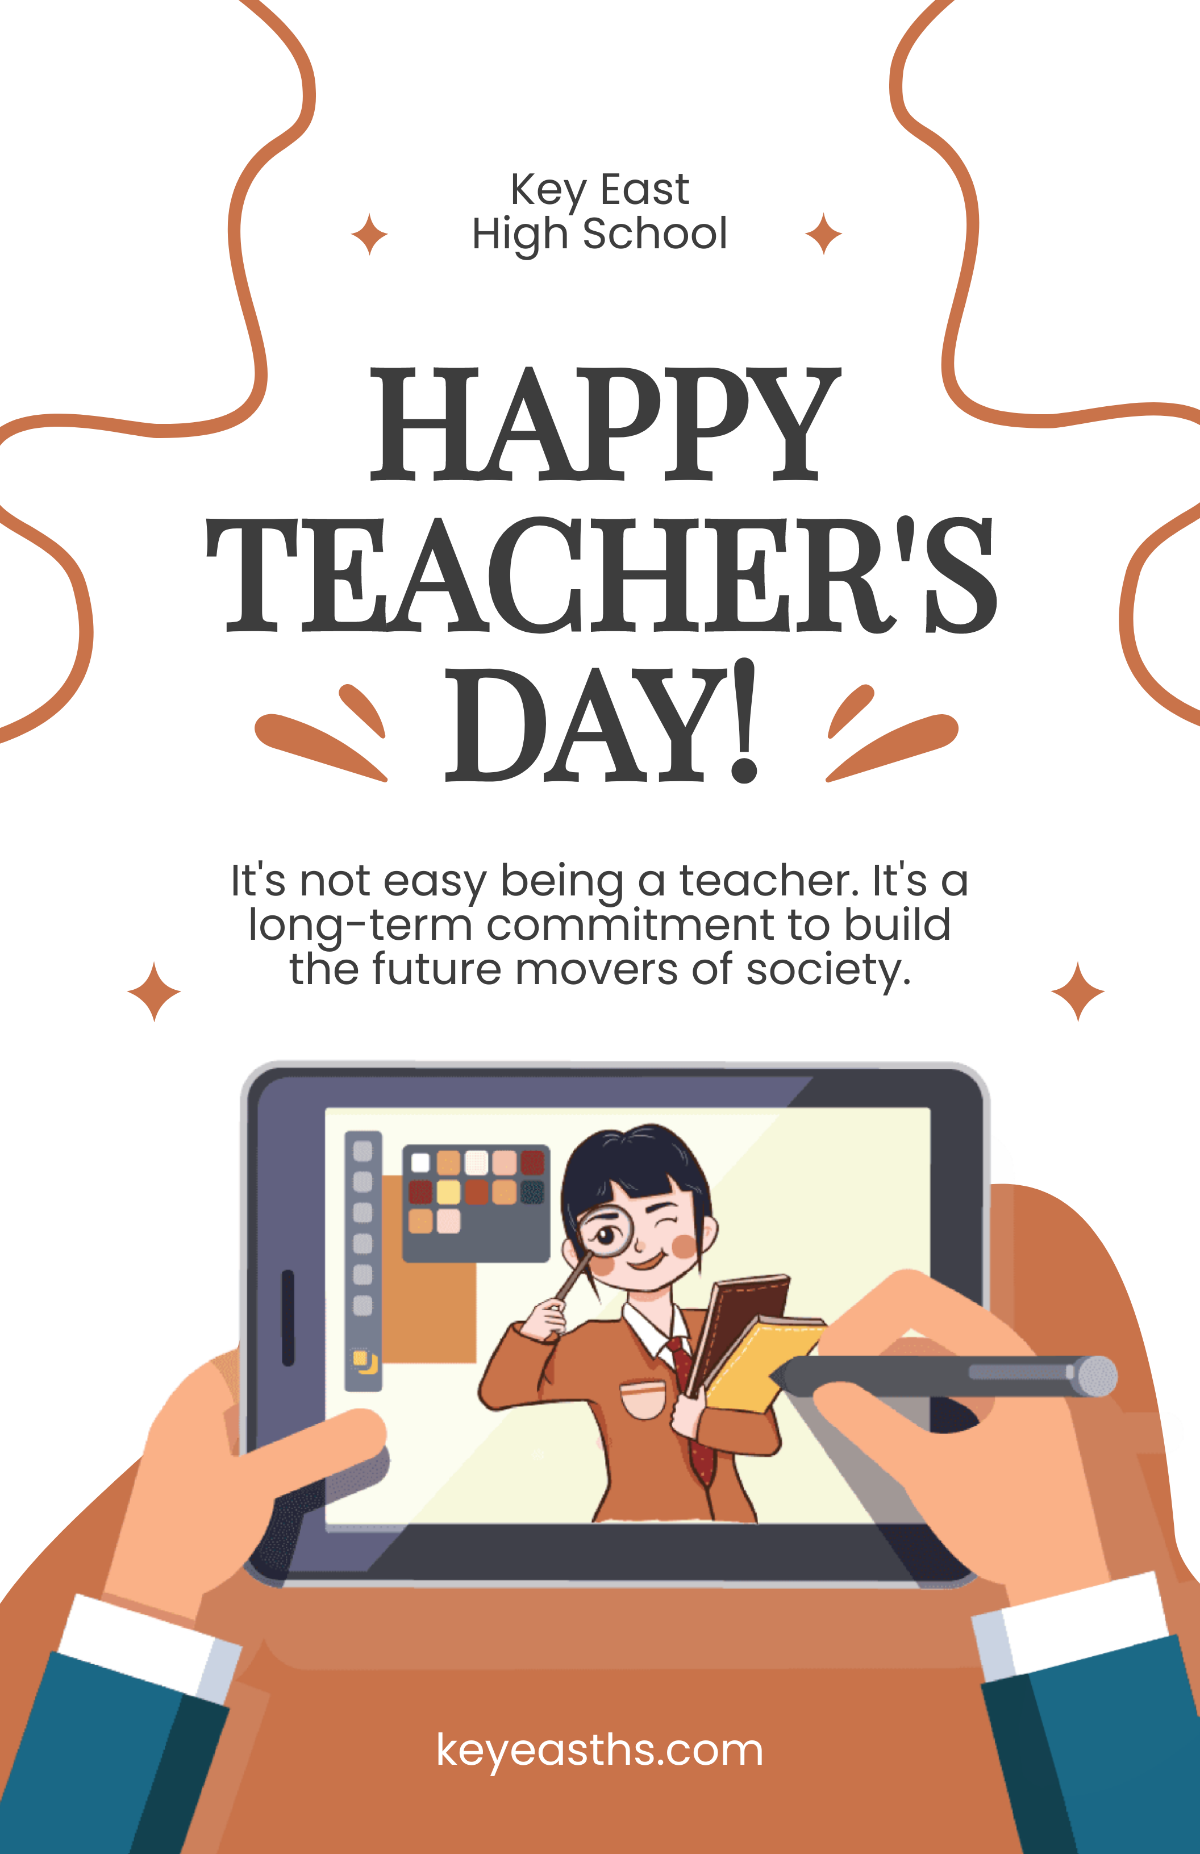 Free Animated Teacher's Day Poster Template